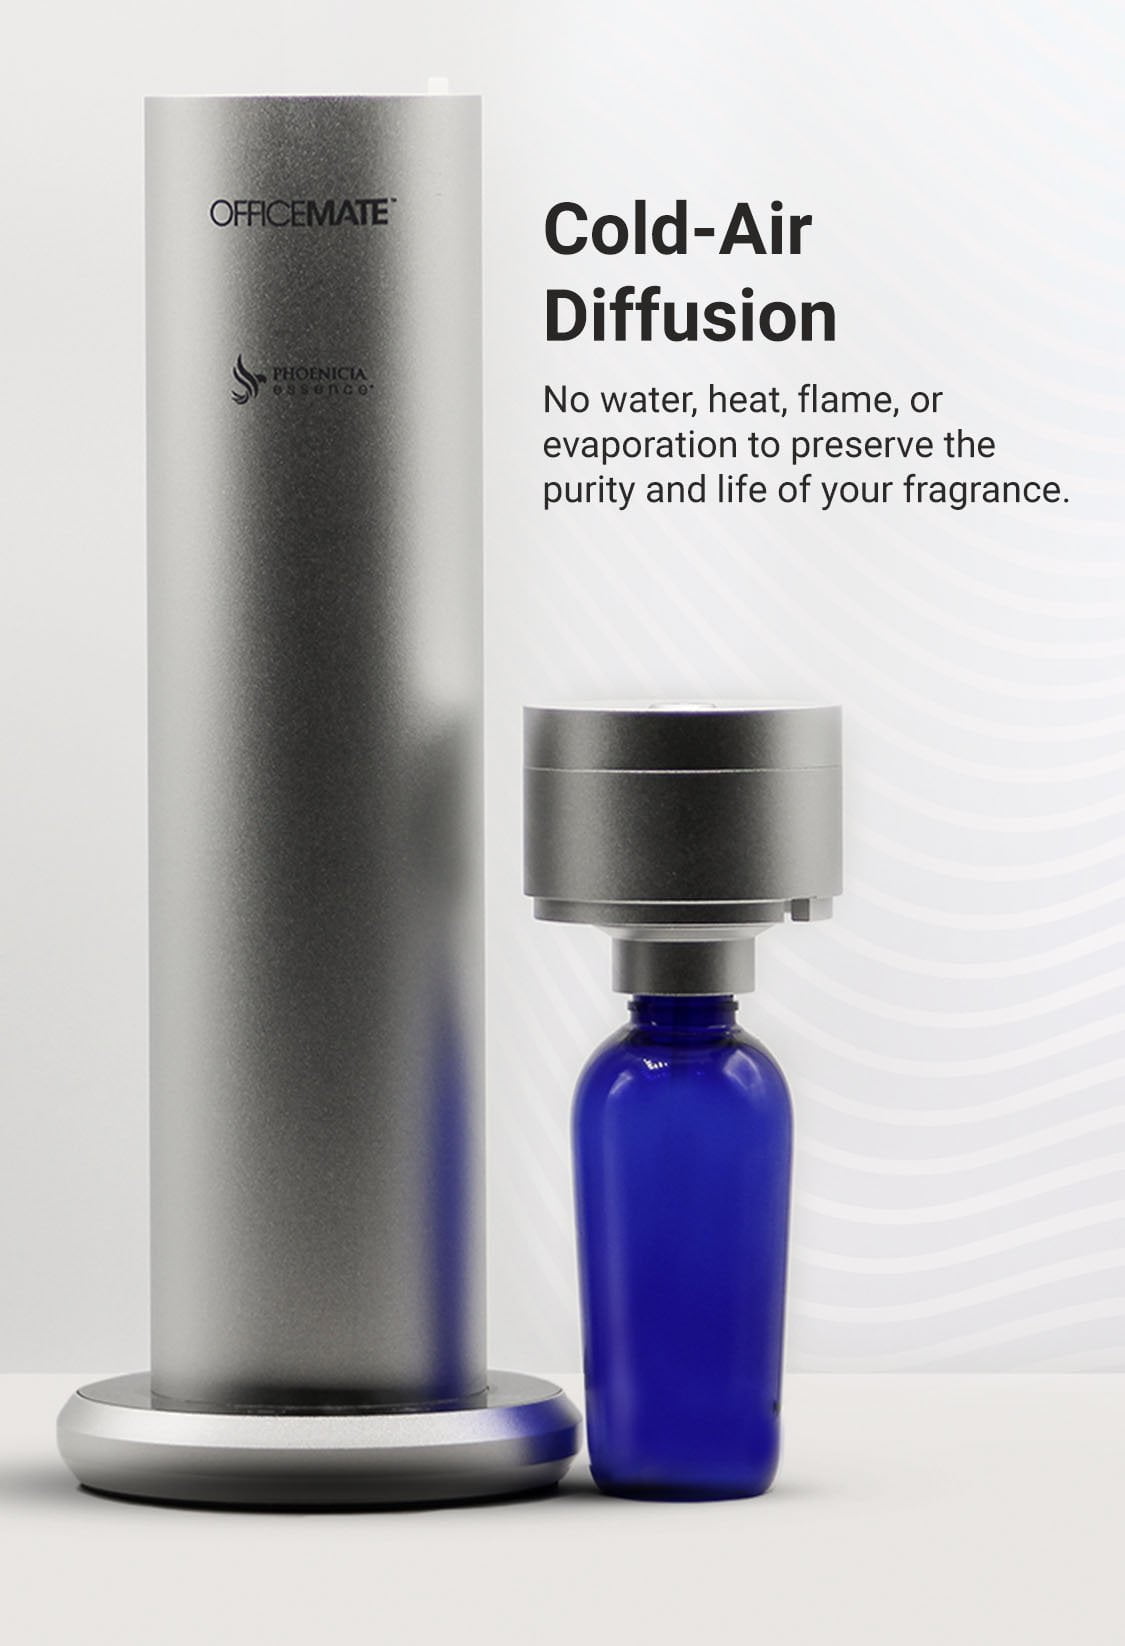 OfficeMate Home Fragrance Diffuser Cold Air Diffusion Image